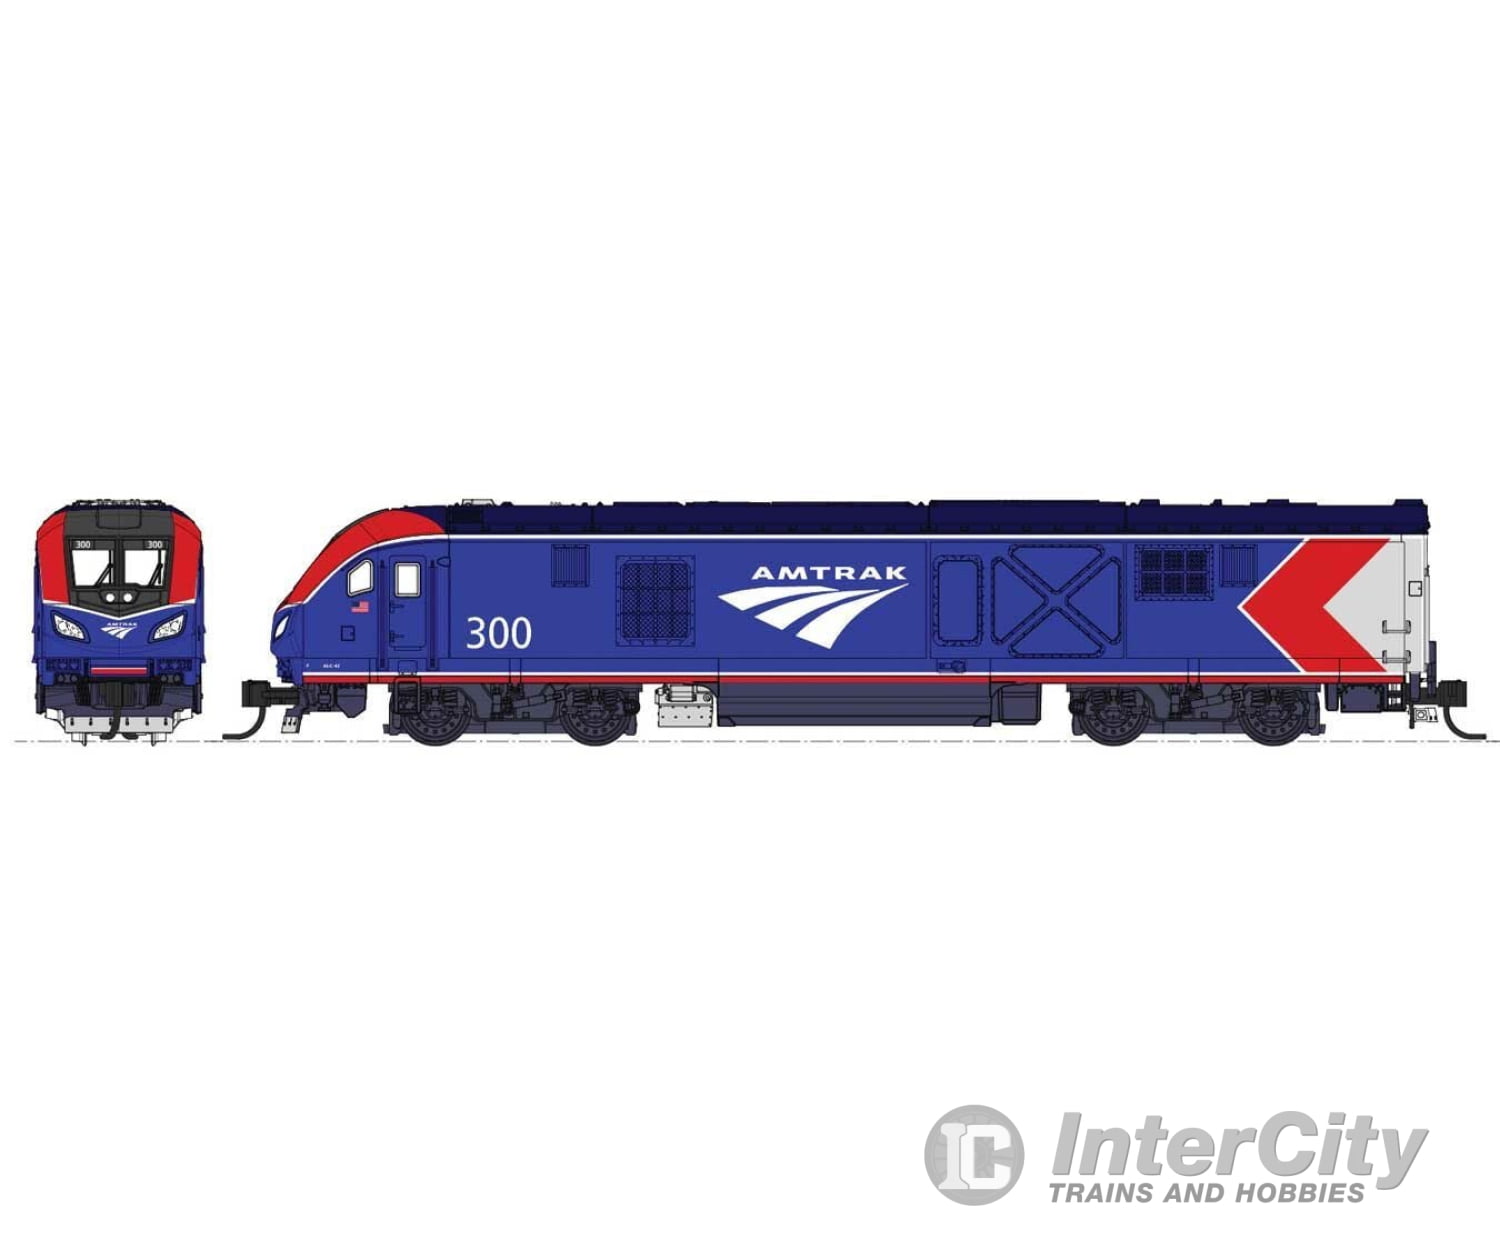 Kato N 1060019 Siemens ALC-42 Charger & 3 Cars Starter Set - Standard DC -- Amtrak #302, Sleeper, Coach, Coach-Baggage, Unitrack Oval, Power Pack - Default Title (CH-381-1060019)